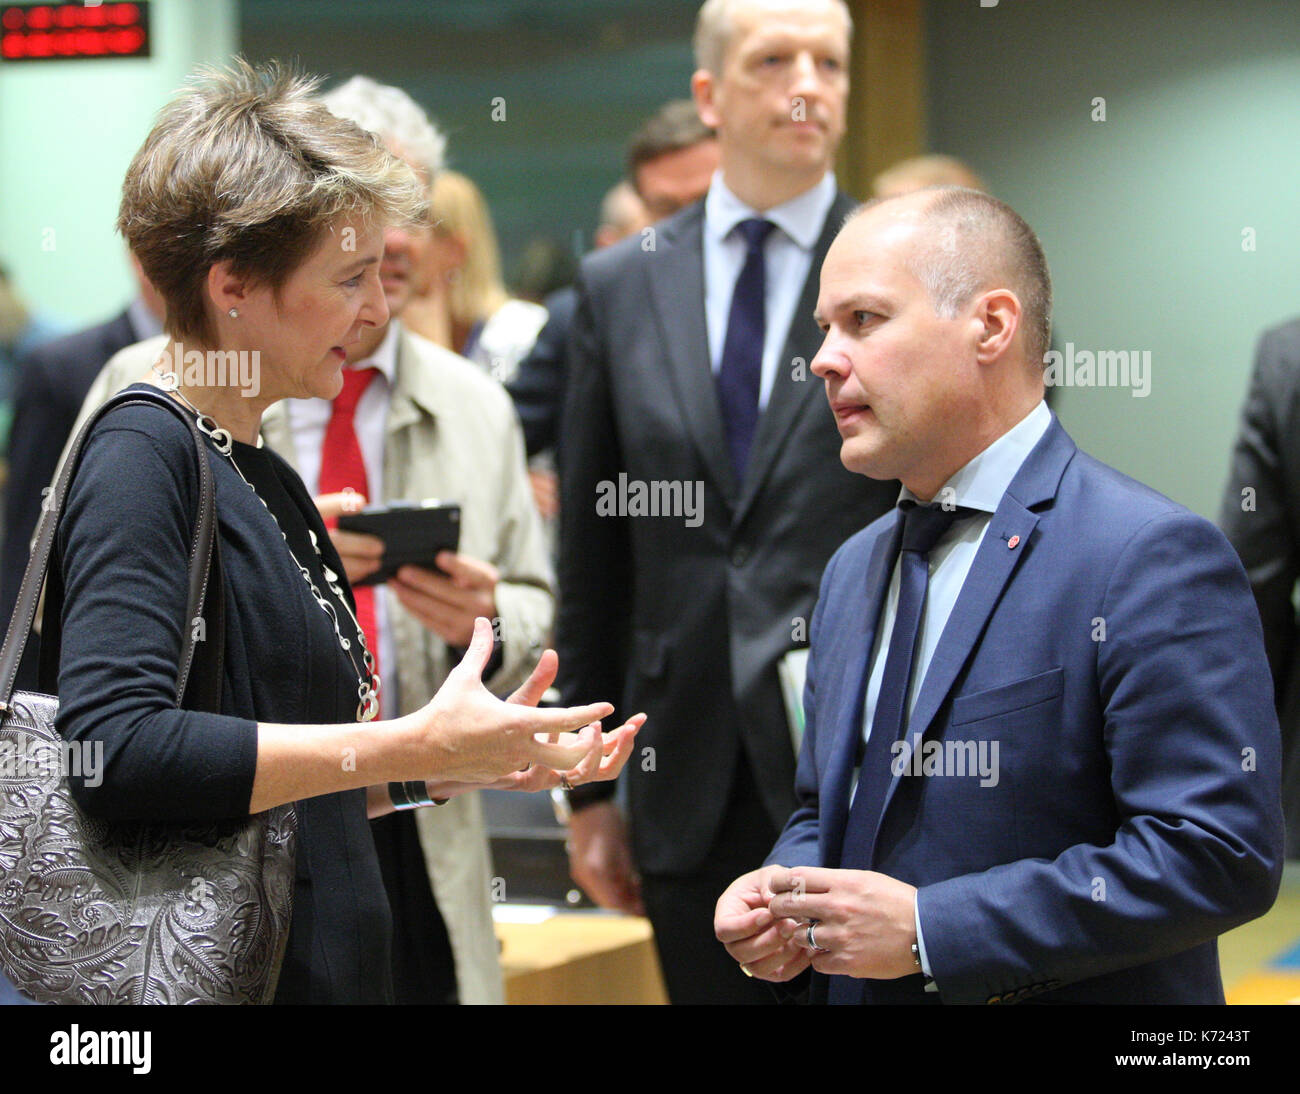 Brussels, Belgium. 14th Sep, 2017. Simoneta Sommaruga Minister for the Interior of Switzerland and Morgan Johansoon Minister for Justice and Home Affairs of Sweden. Credit: Leo Cavallo/Alamy Live News Stock Photo